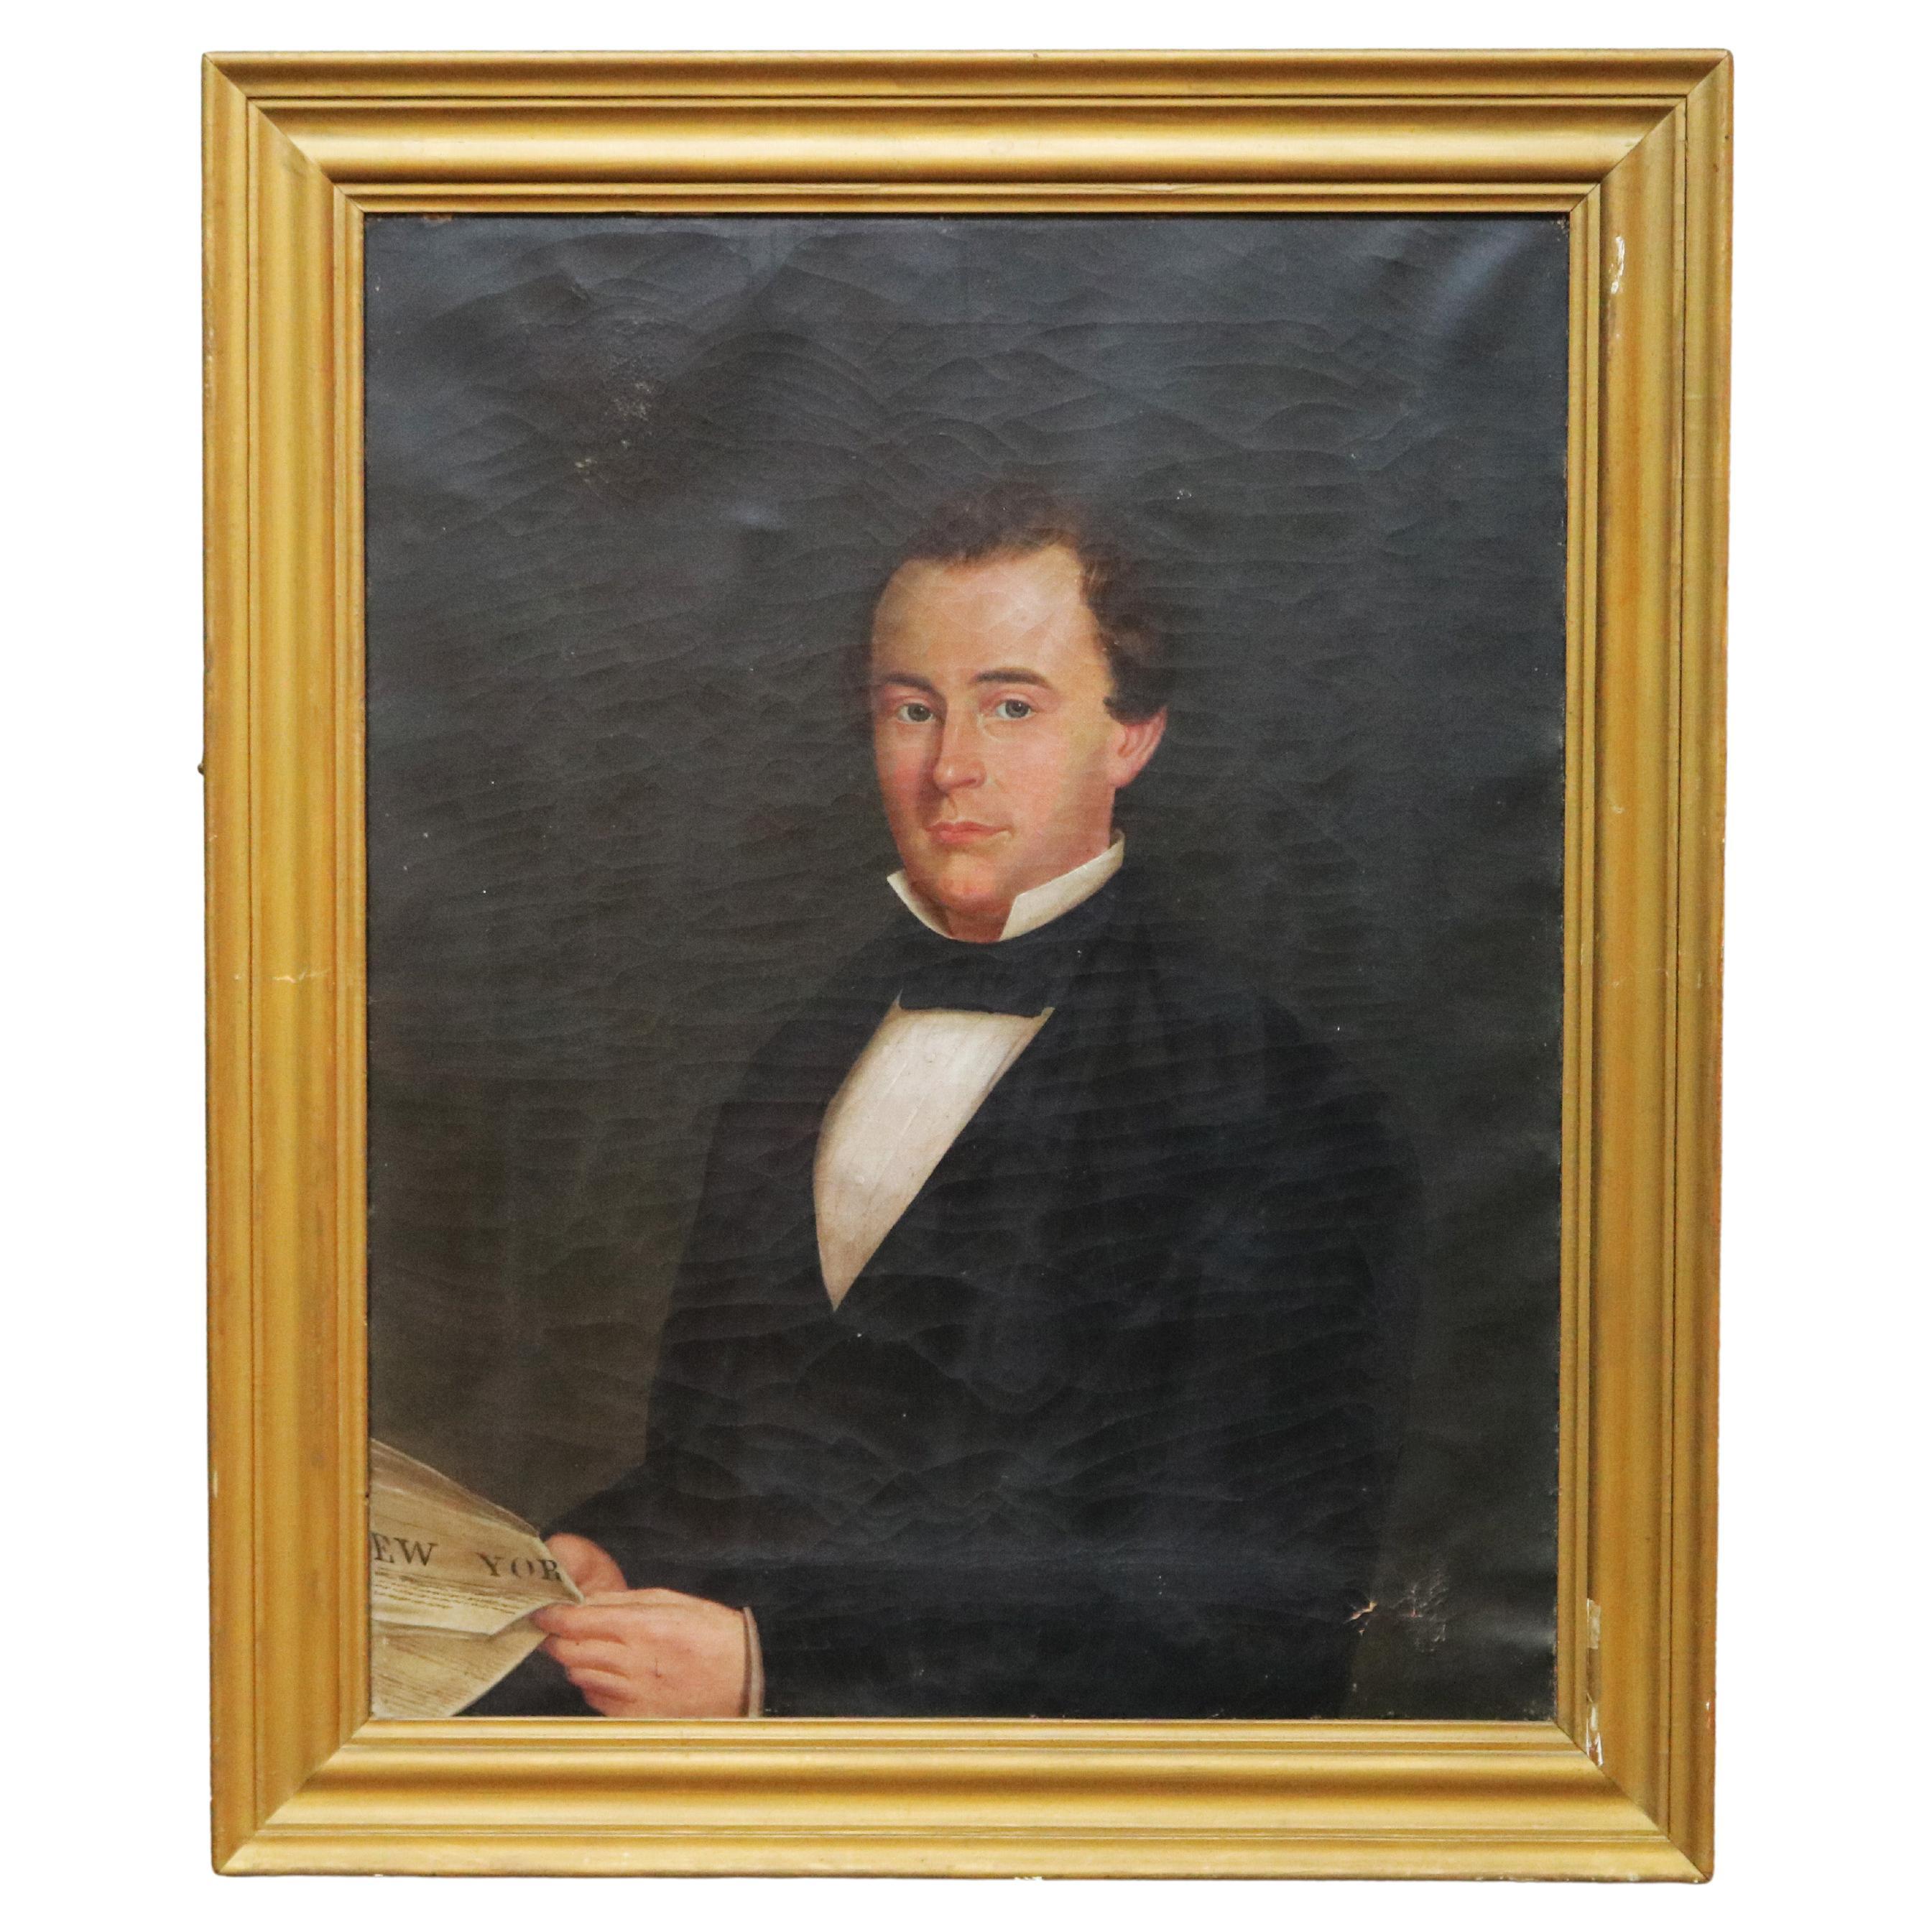 Large Early Antique Portrait Painting, Gentleman Holding a NY Newspaper, c1850